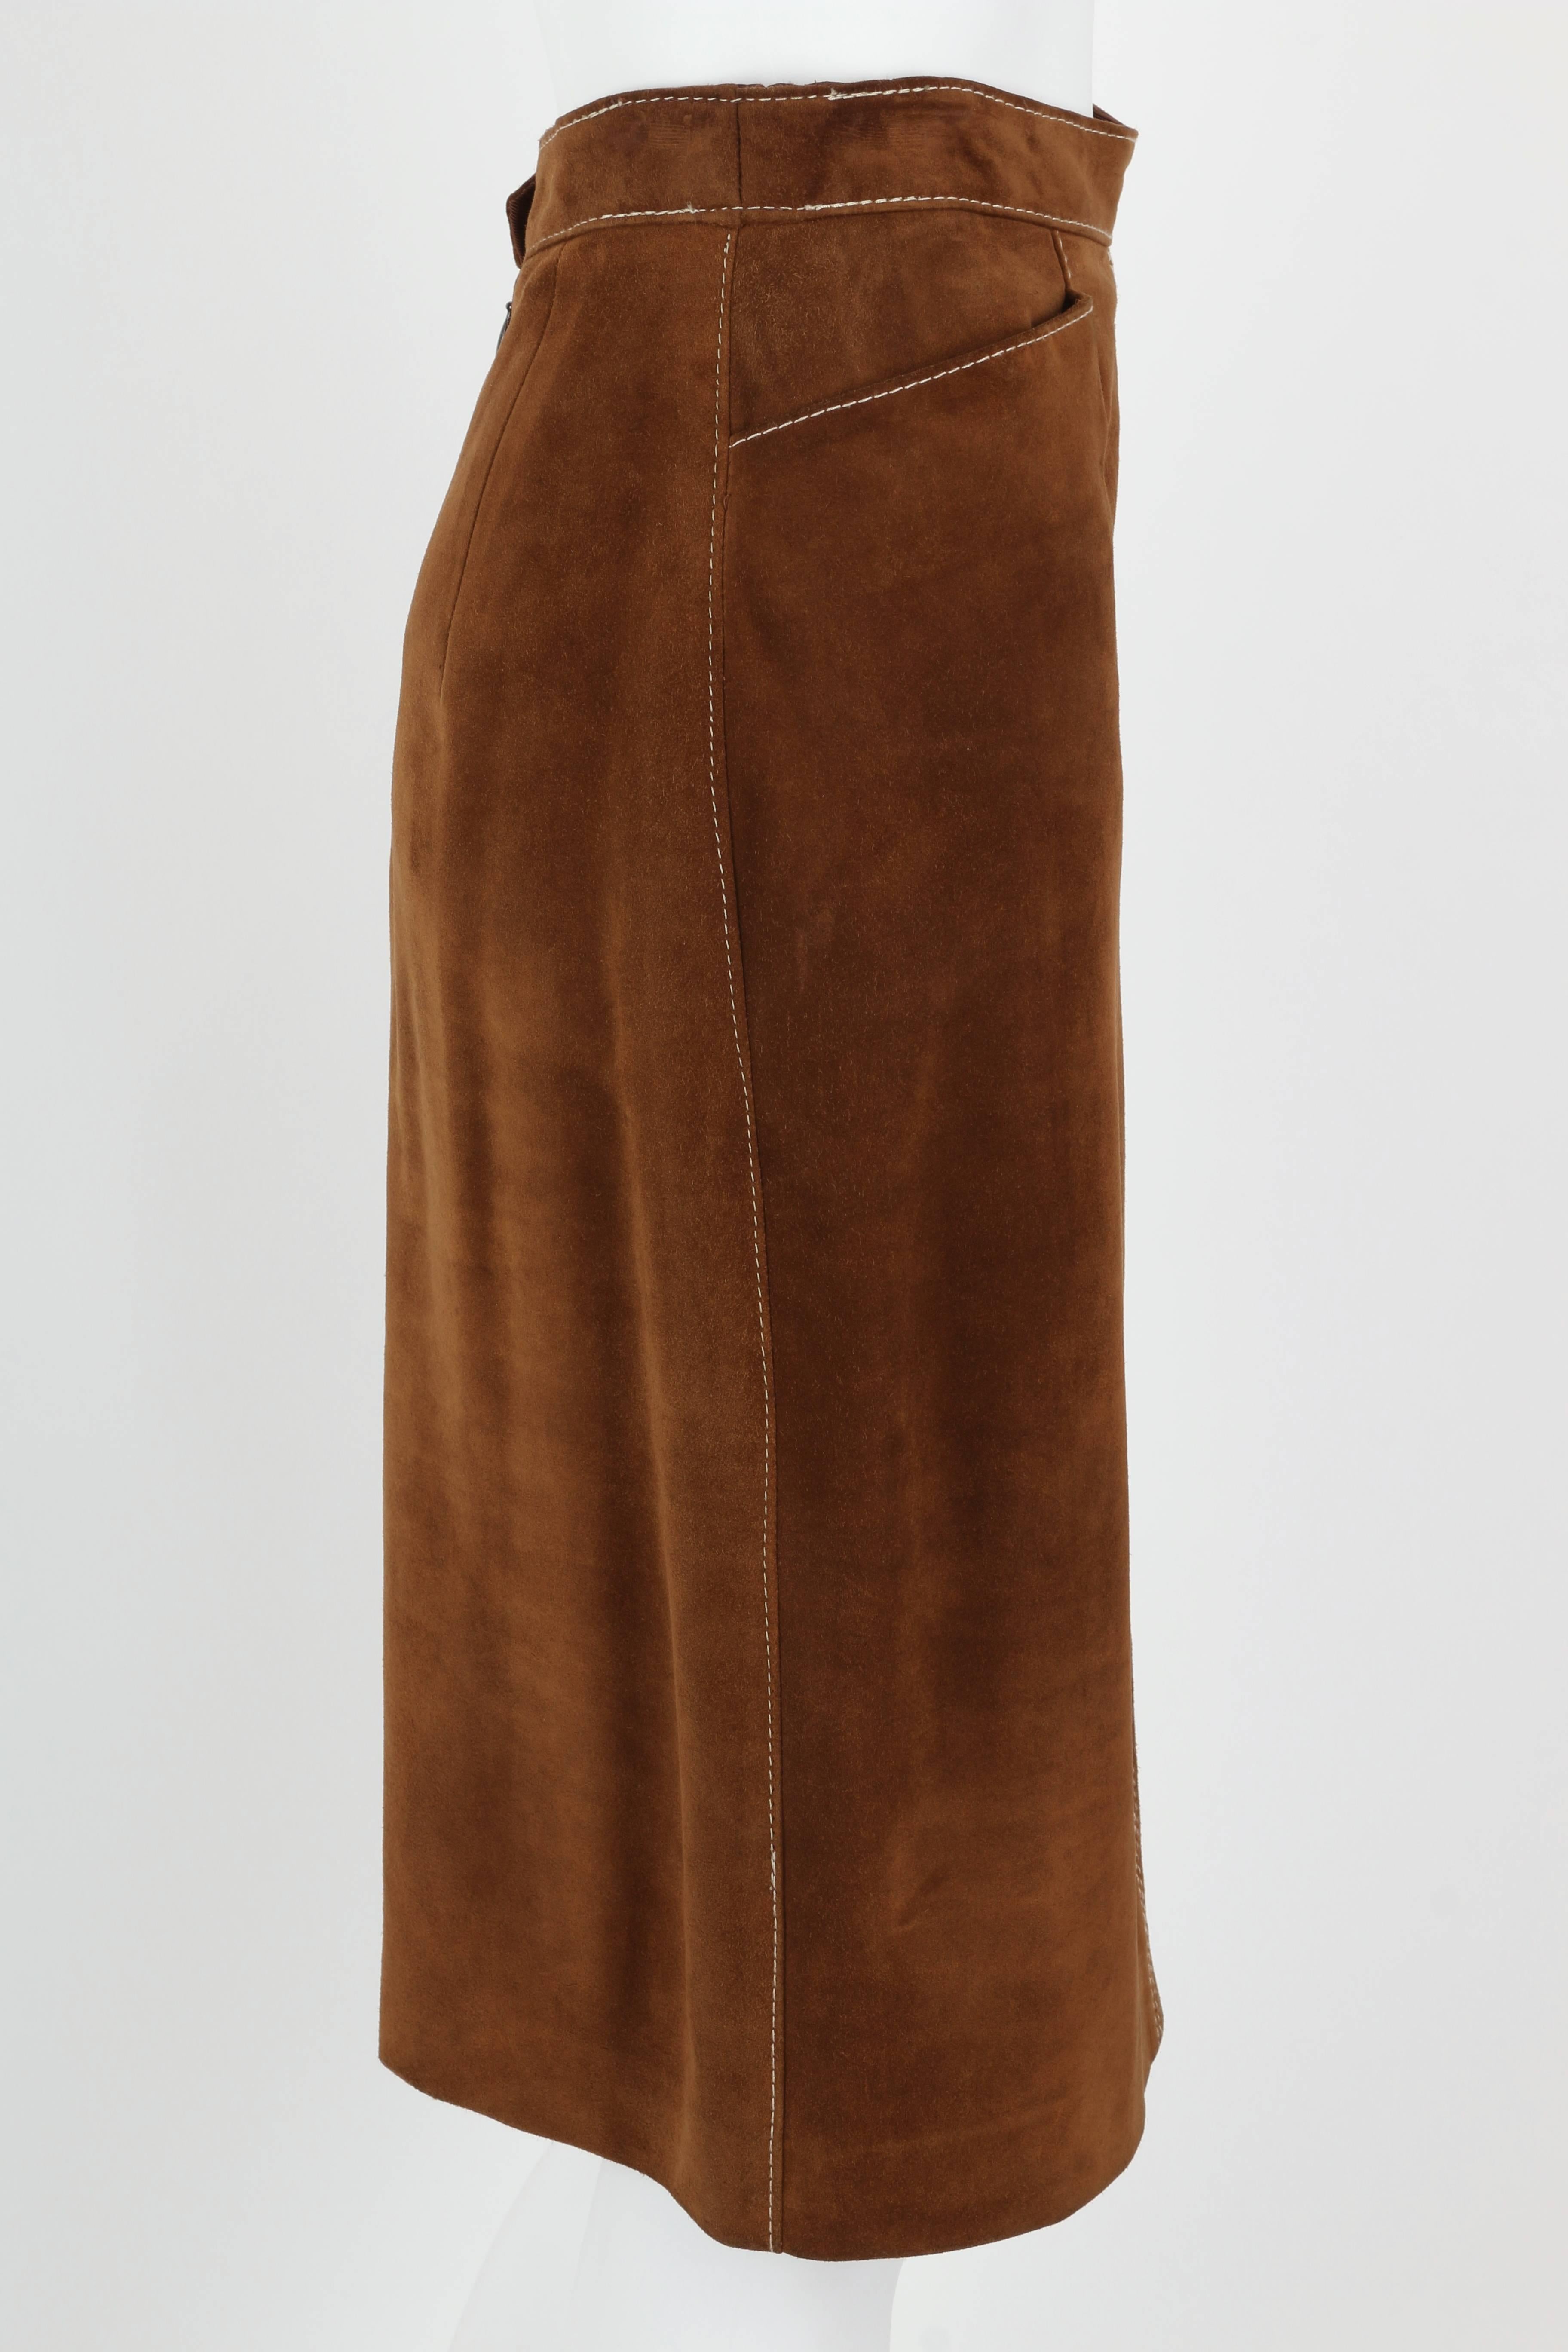 suede leather skirt